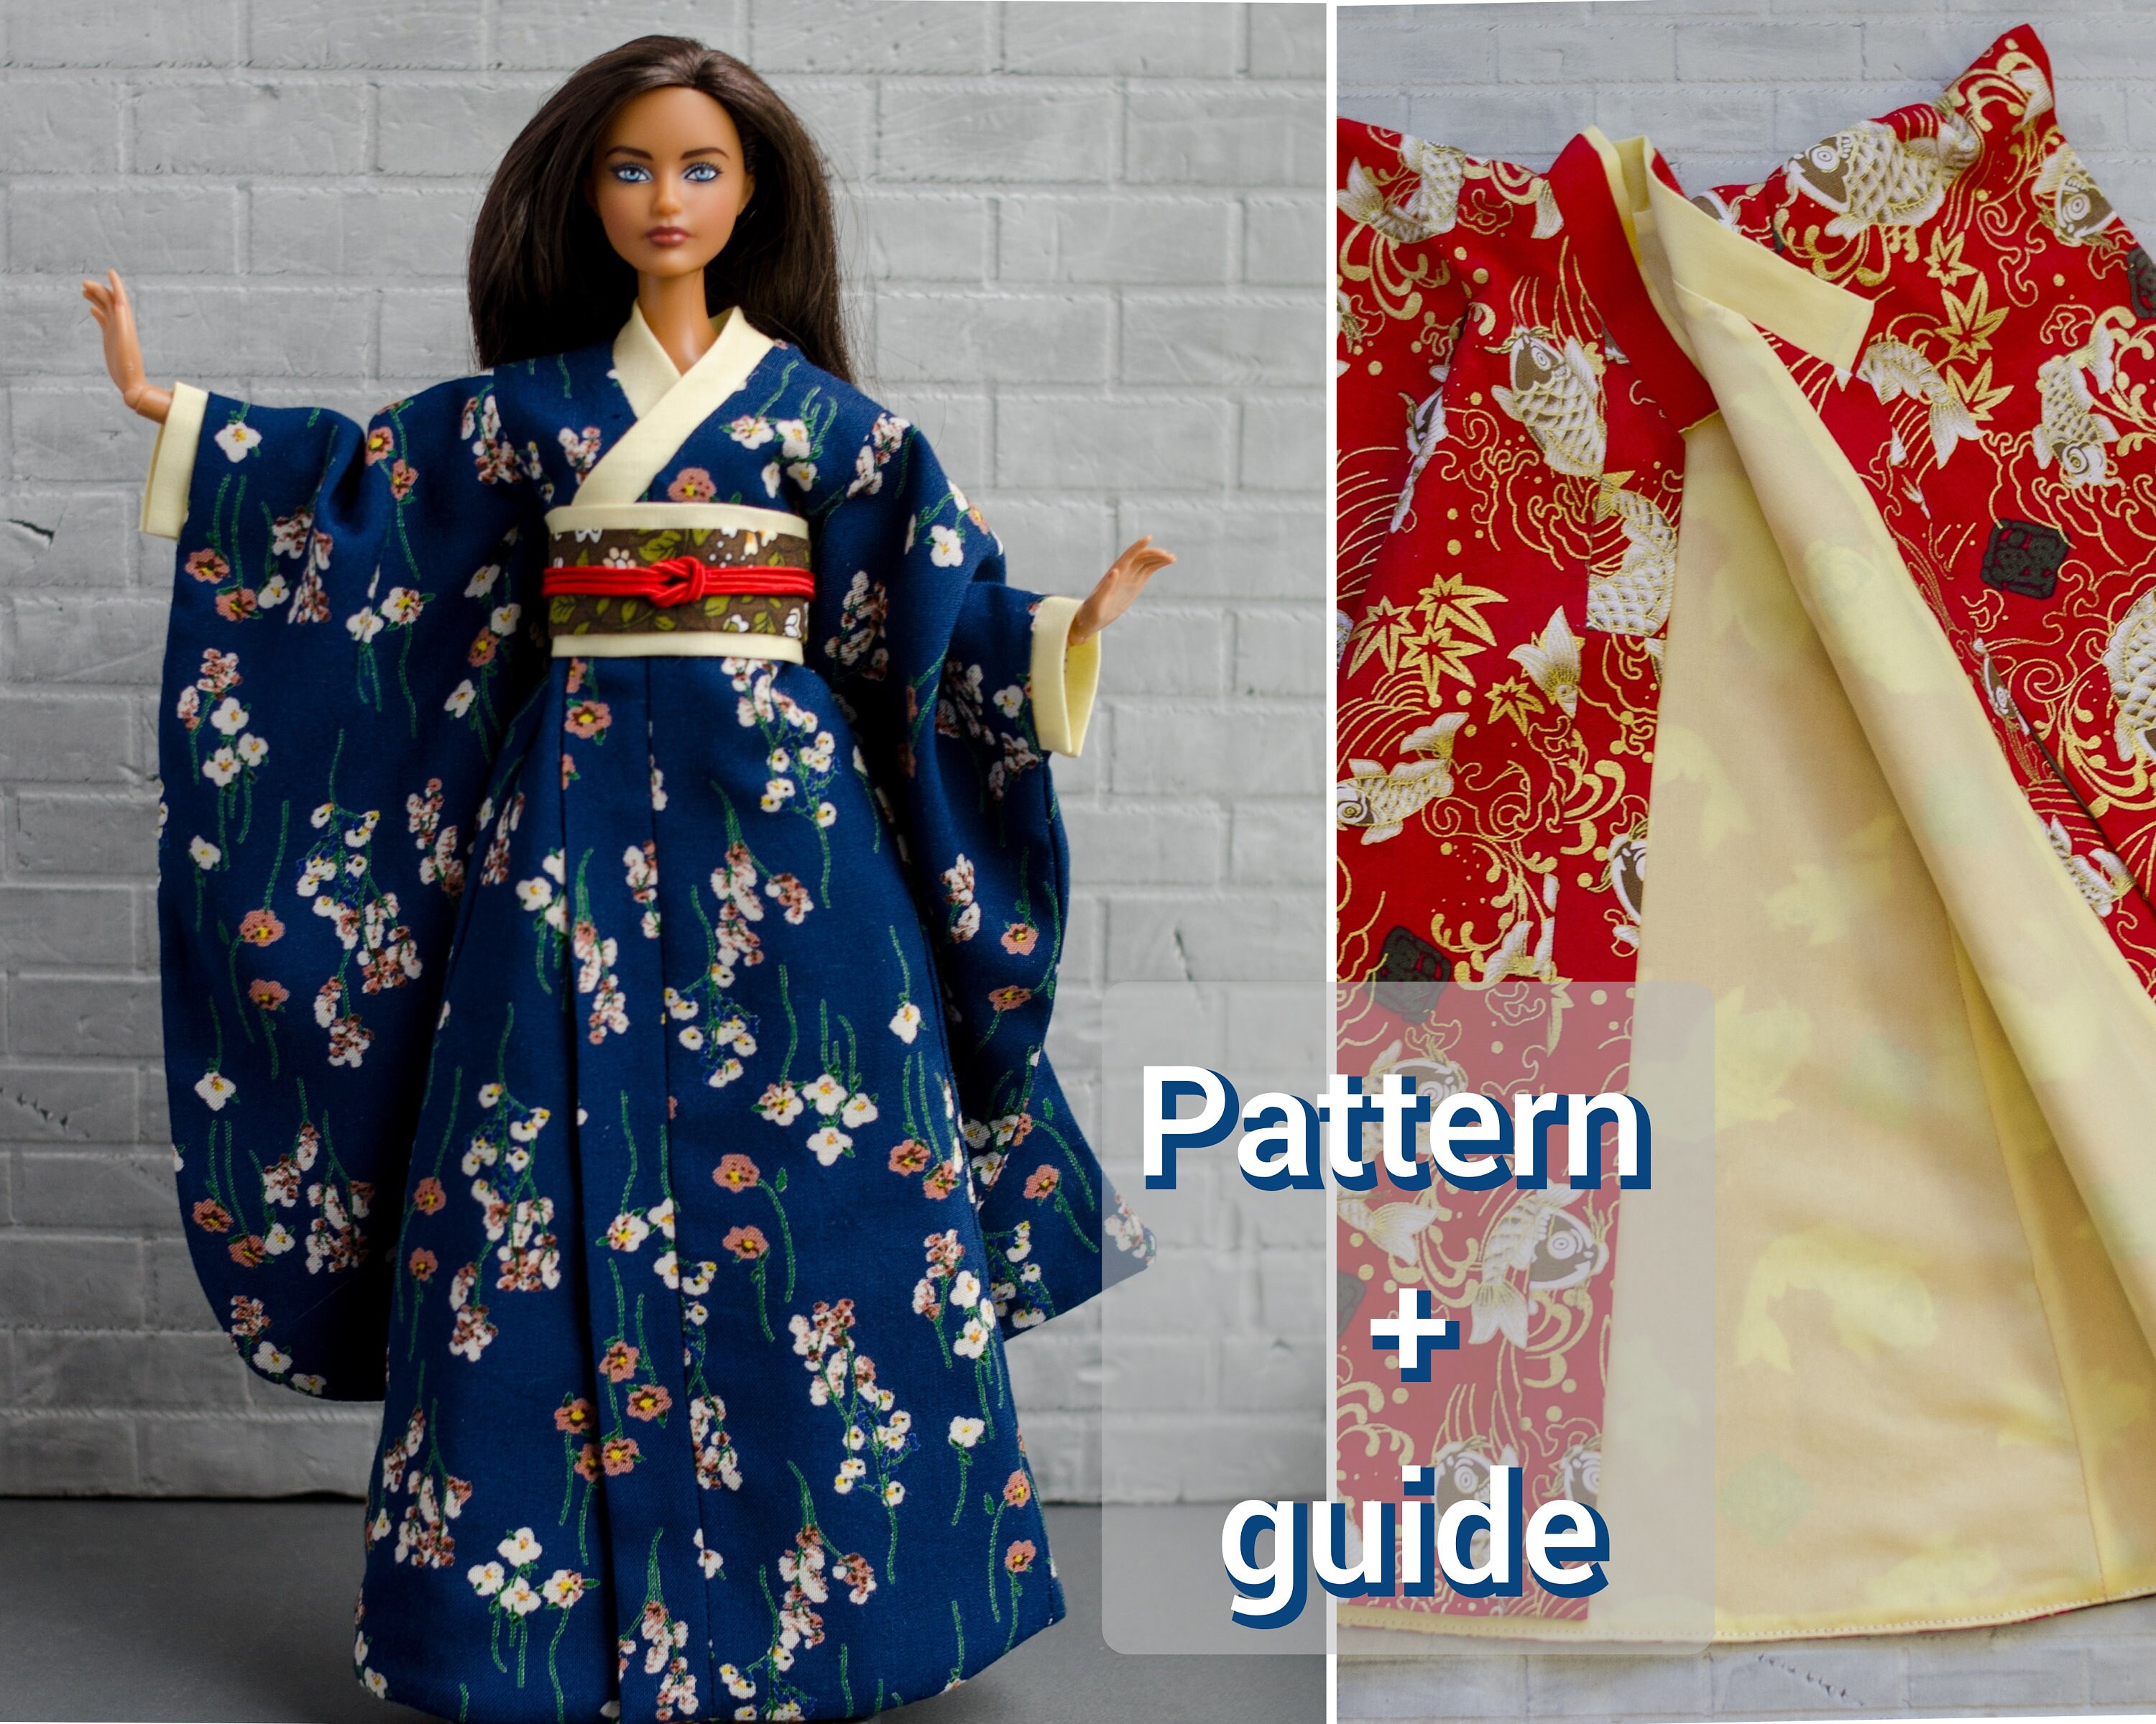 Pattern and Guide for Barbie Fashion - Etsy